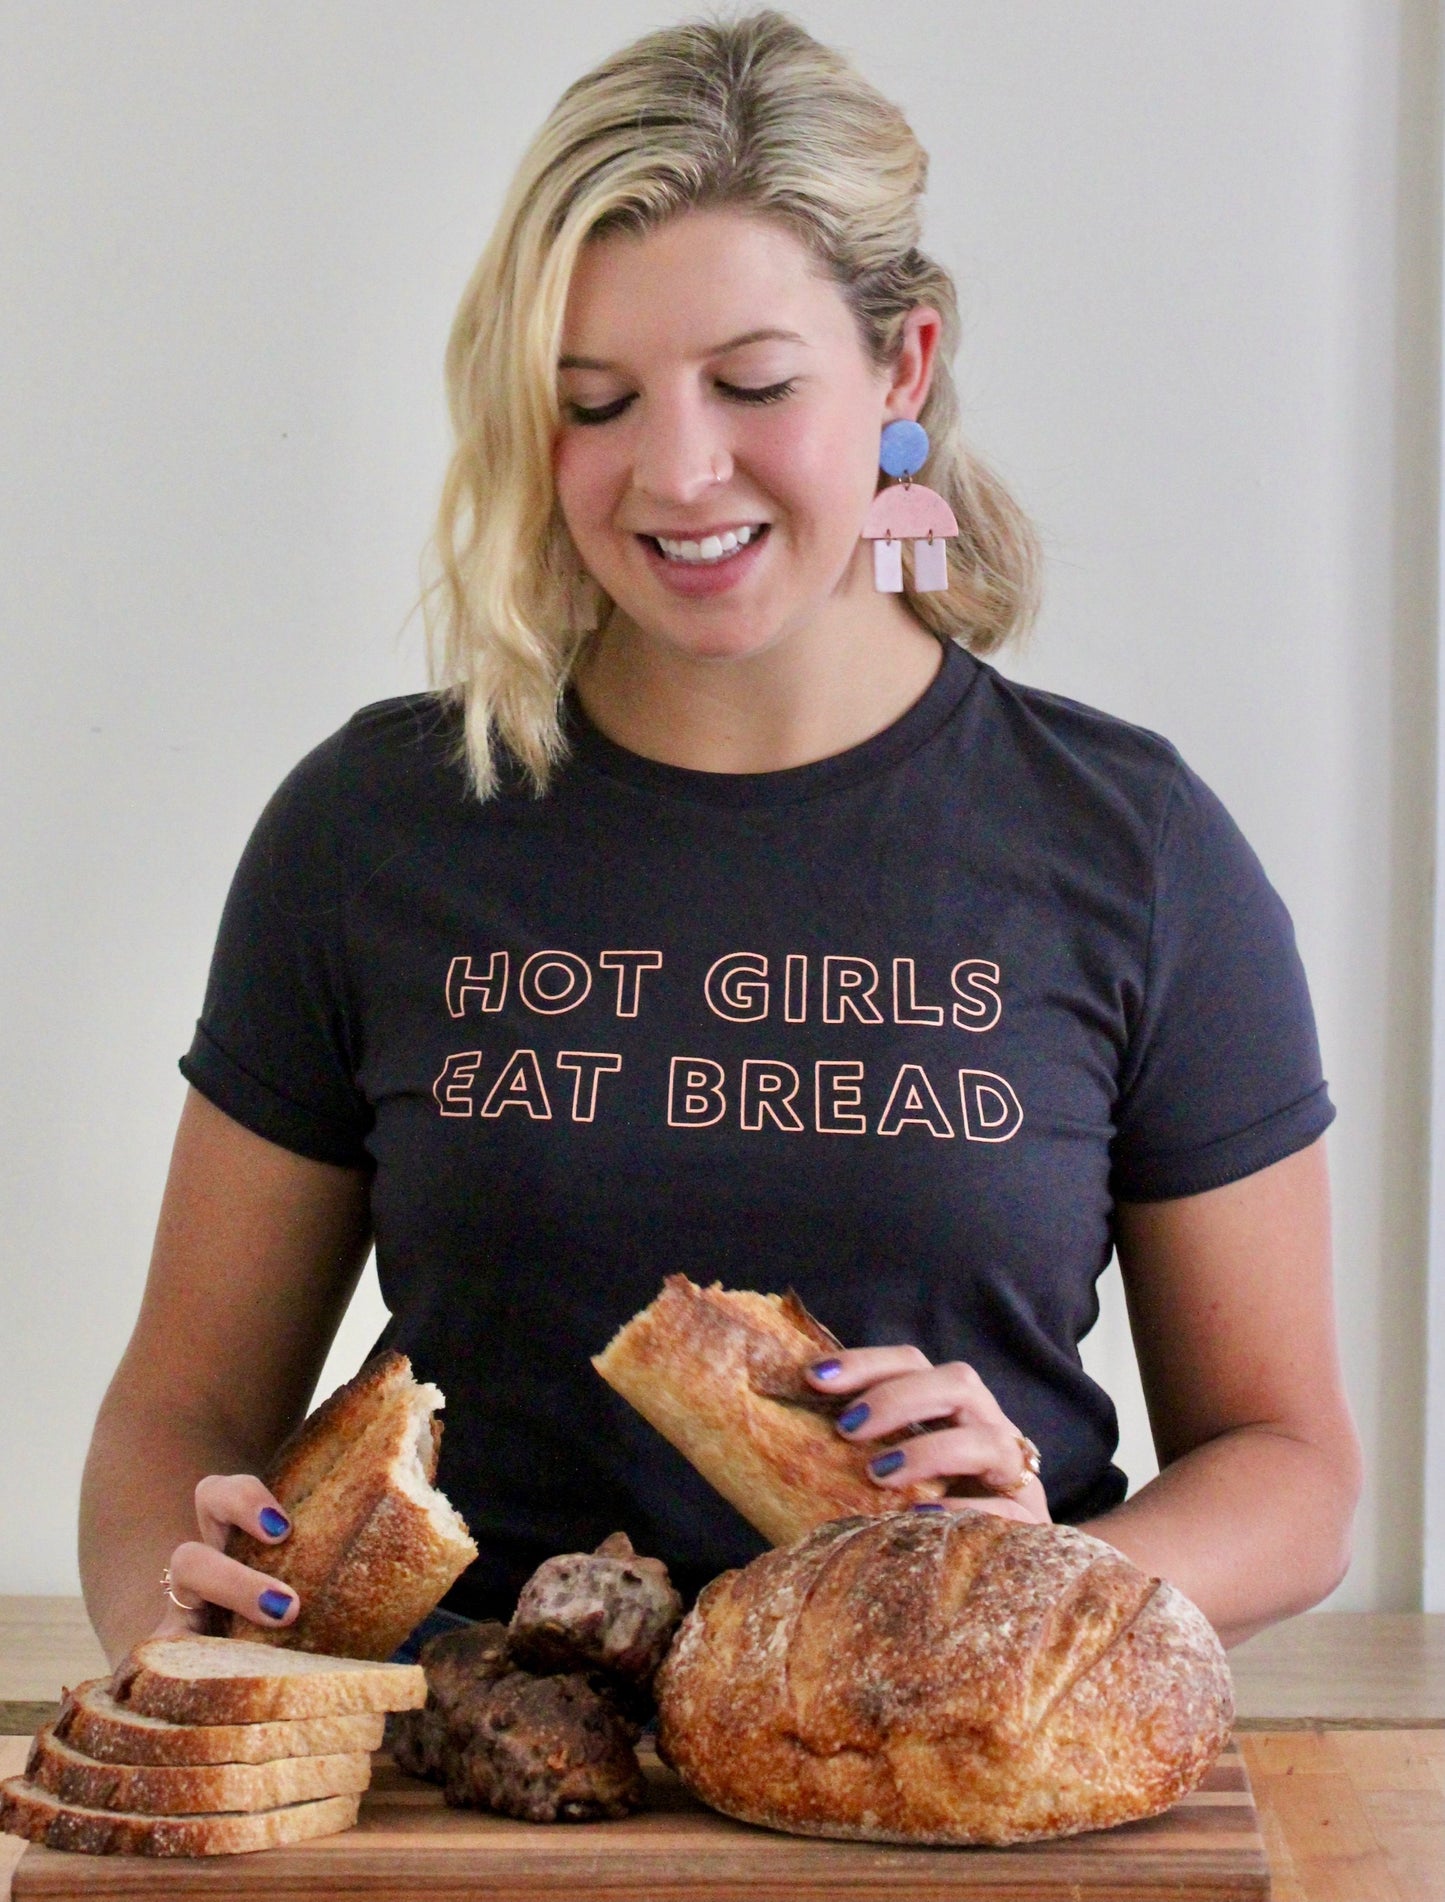 A woman in a dark grey tee that reads "Hot Girls Eat Bread" looks down at loaves and slices of bread